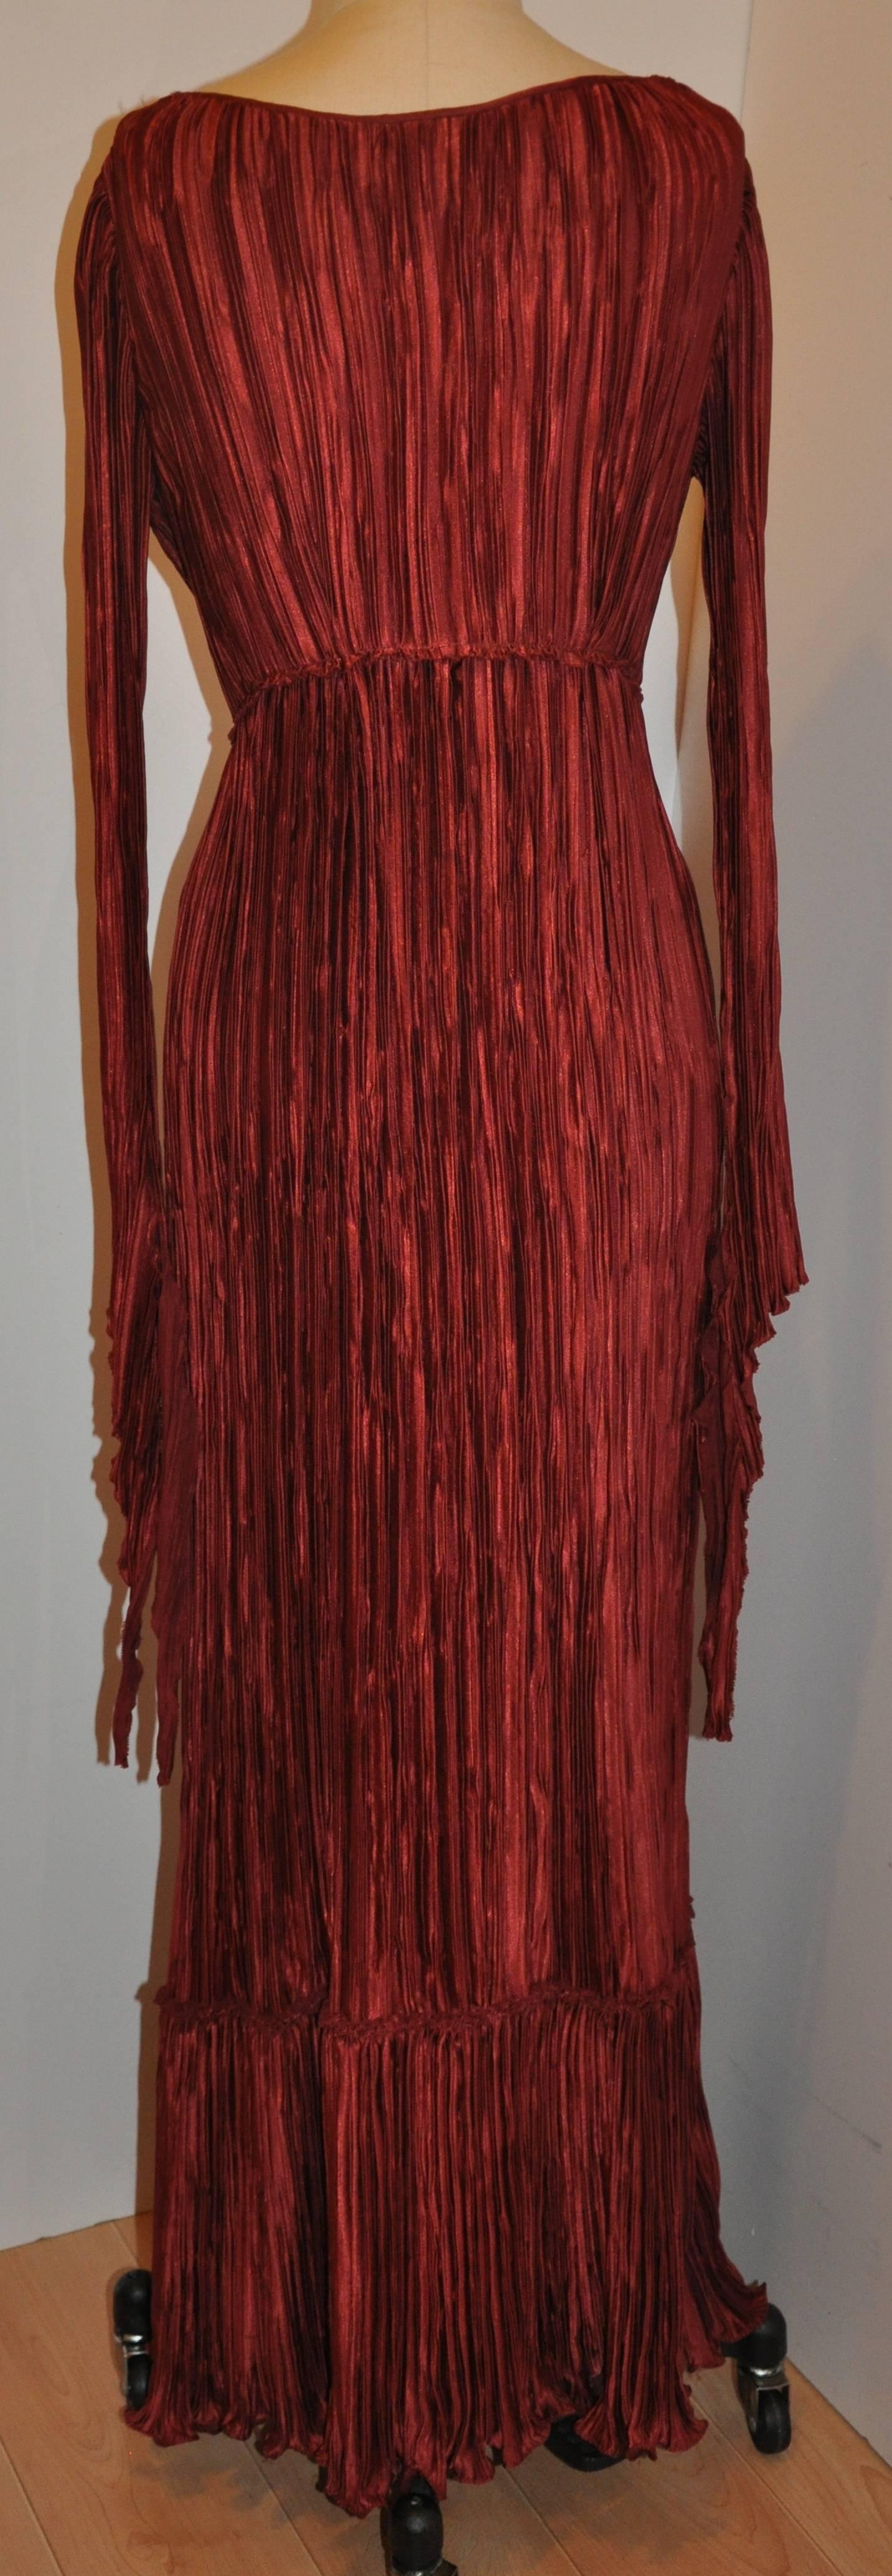         Mary McFadden wonderfully elegant signature pleated body-hugging gown in burgundy is accented with long slim ties on both sleeve's cuffs measuring 12 1/4